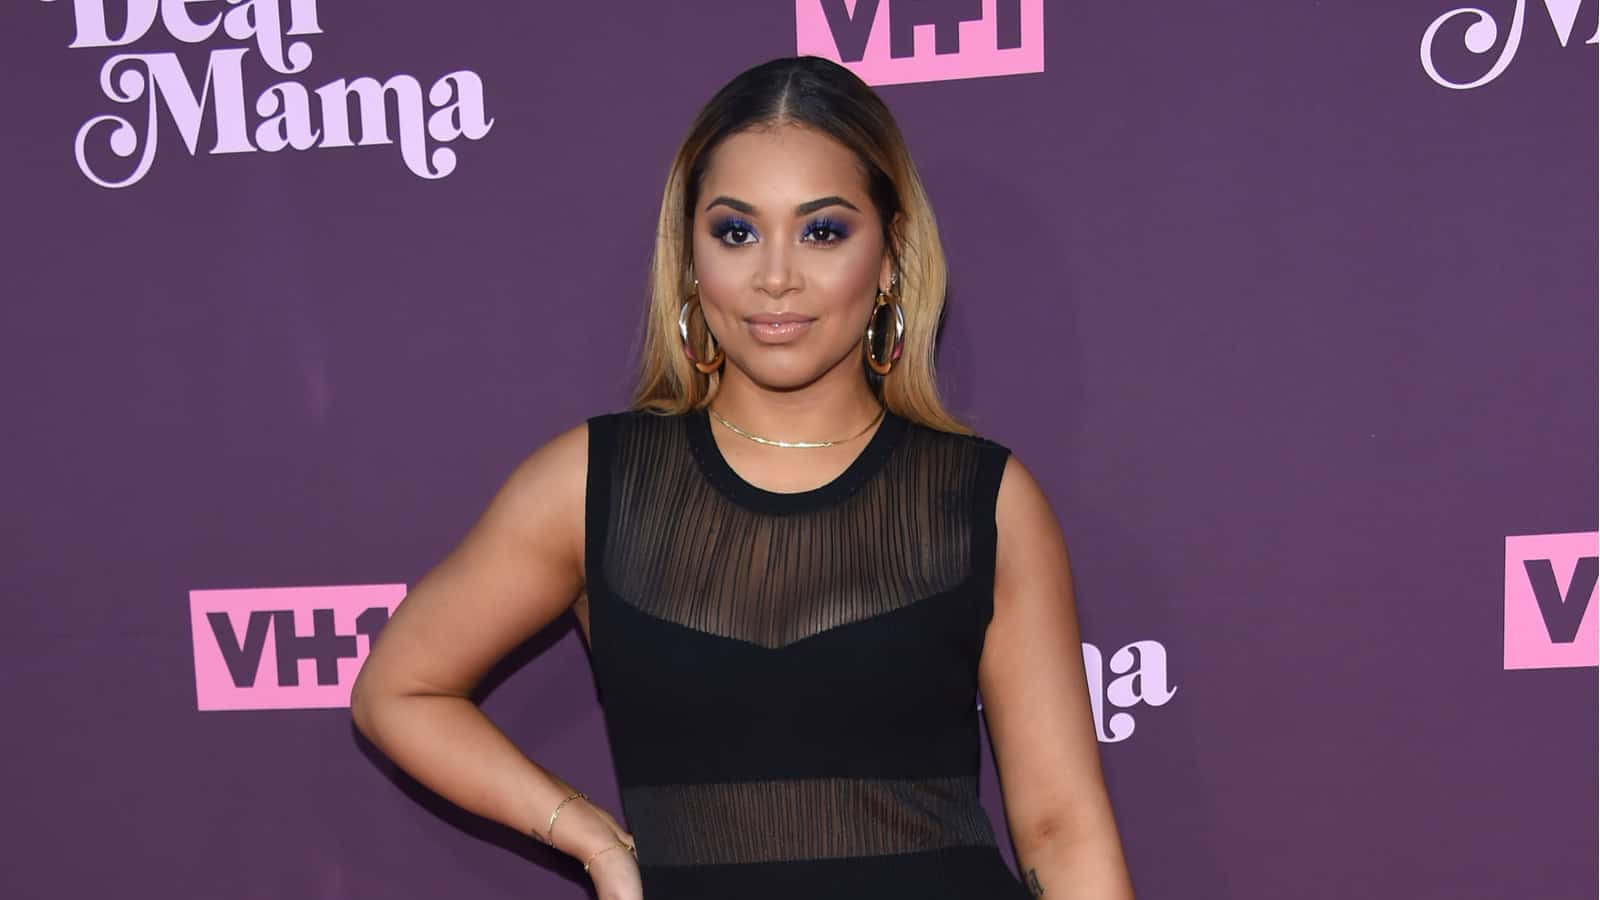 Lauren London Looking Stunning In A Stylish Outfit Wallpaper